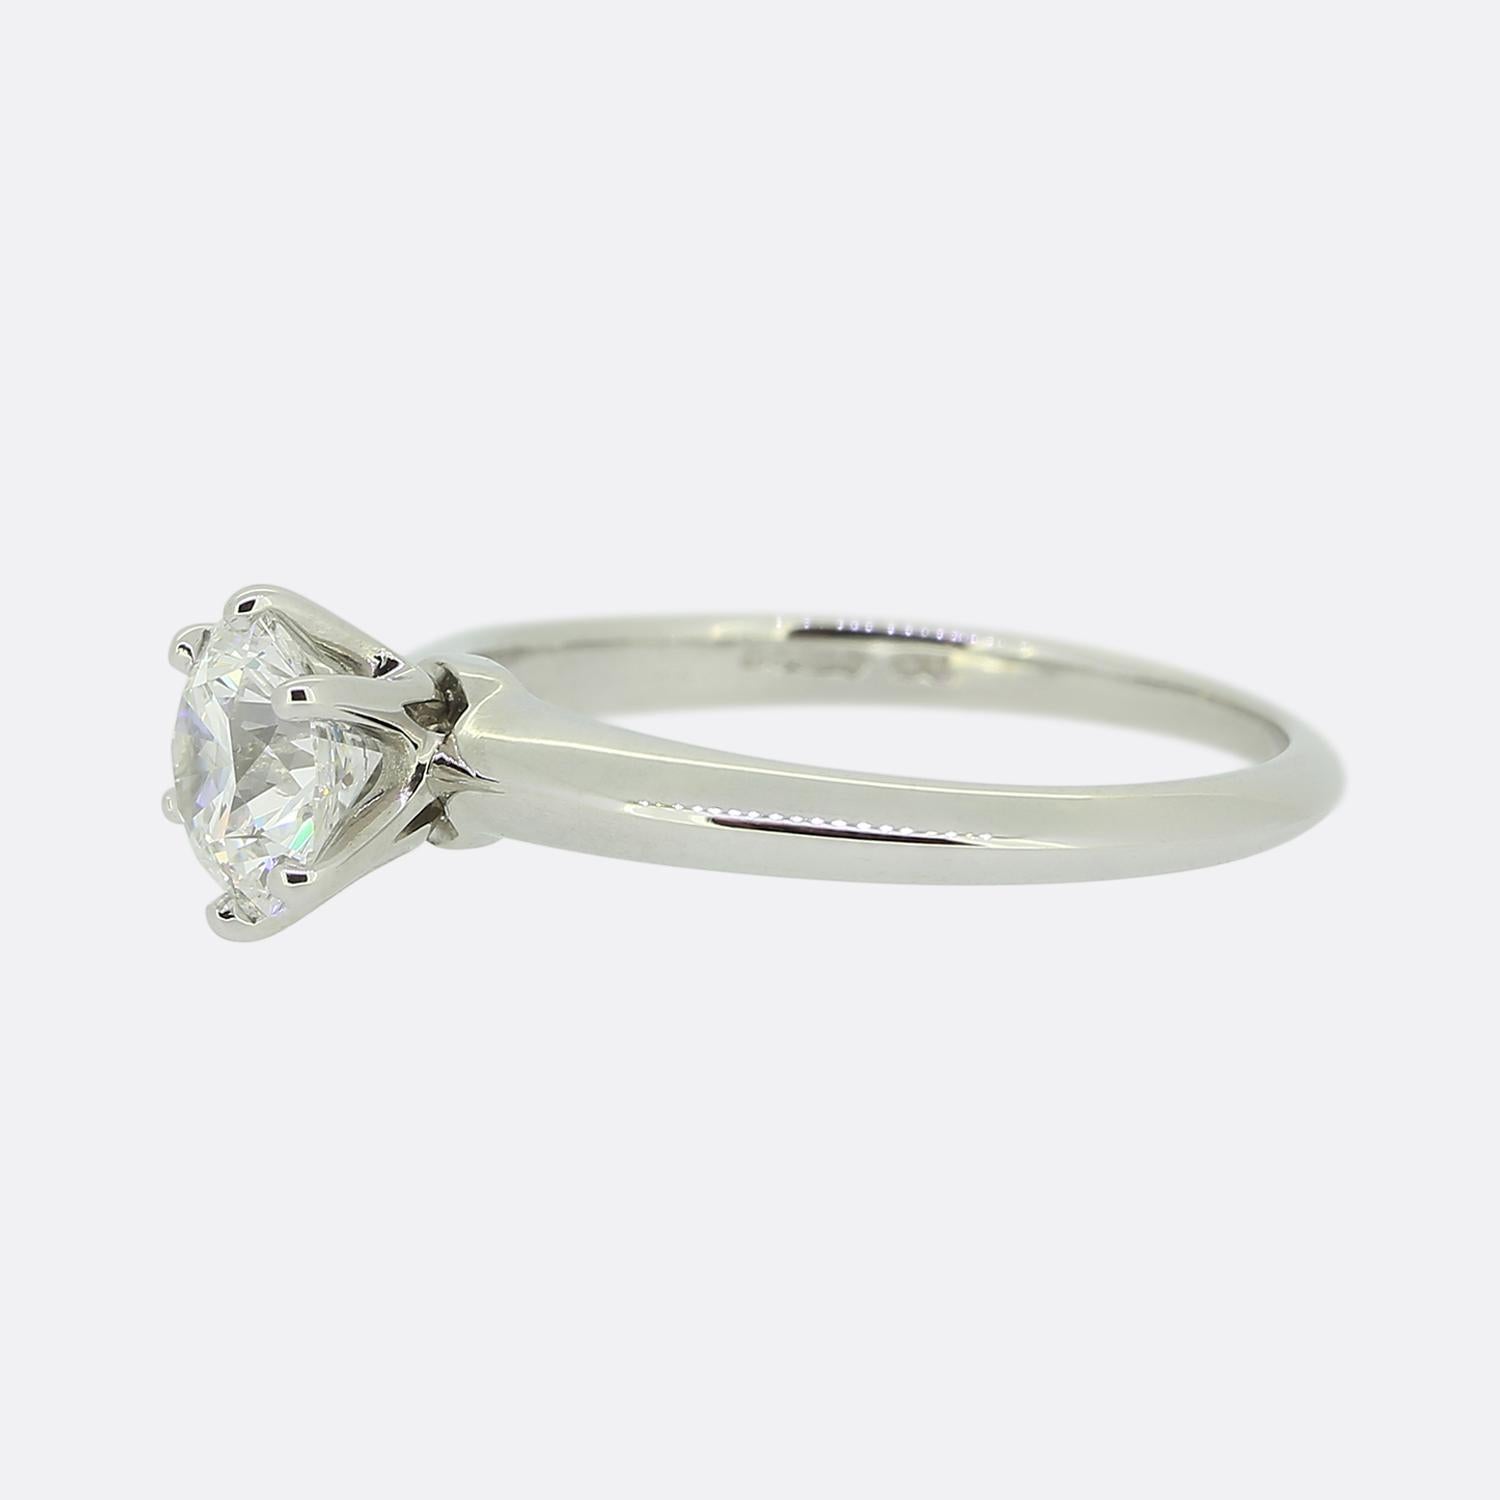 Here we have a wonderful platinum solitaire engagement ring from the world renowned jewellery designer, Tiffany & Co. The centre stone is an impressive 1.01 carat round brilliant cut diamond set Tiffany's iconic 6 clawed mount.

Condition: Used